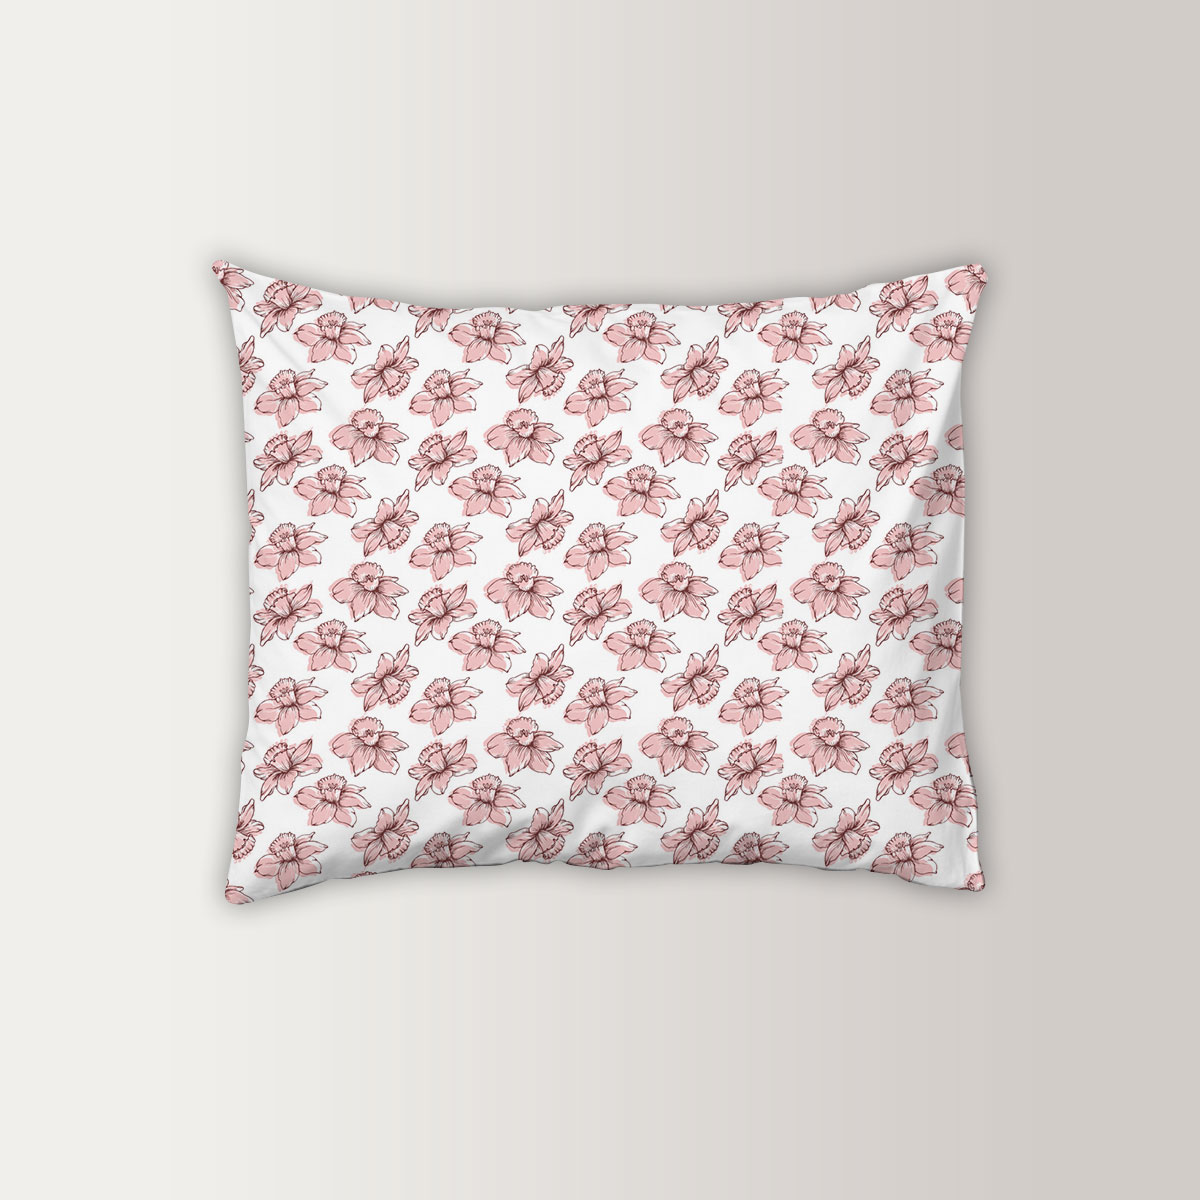 Blossom Daffodils Flowers Pillow Case